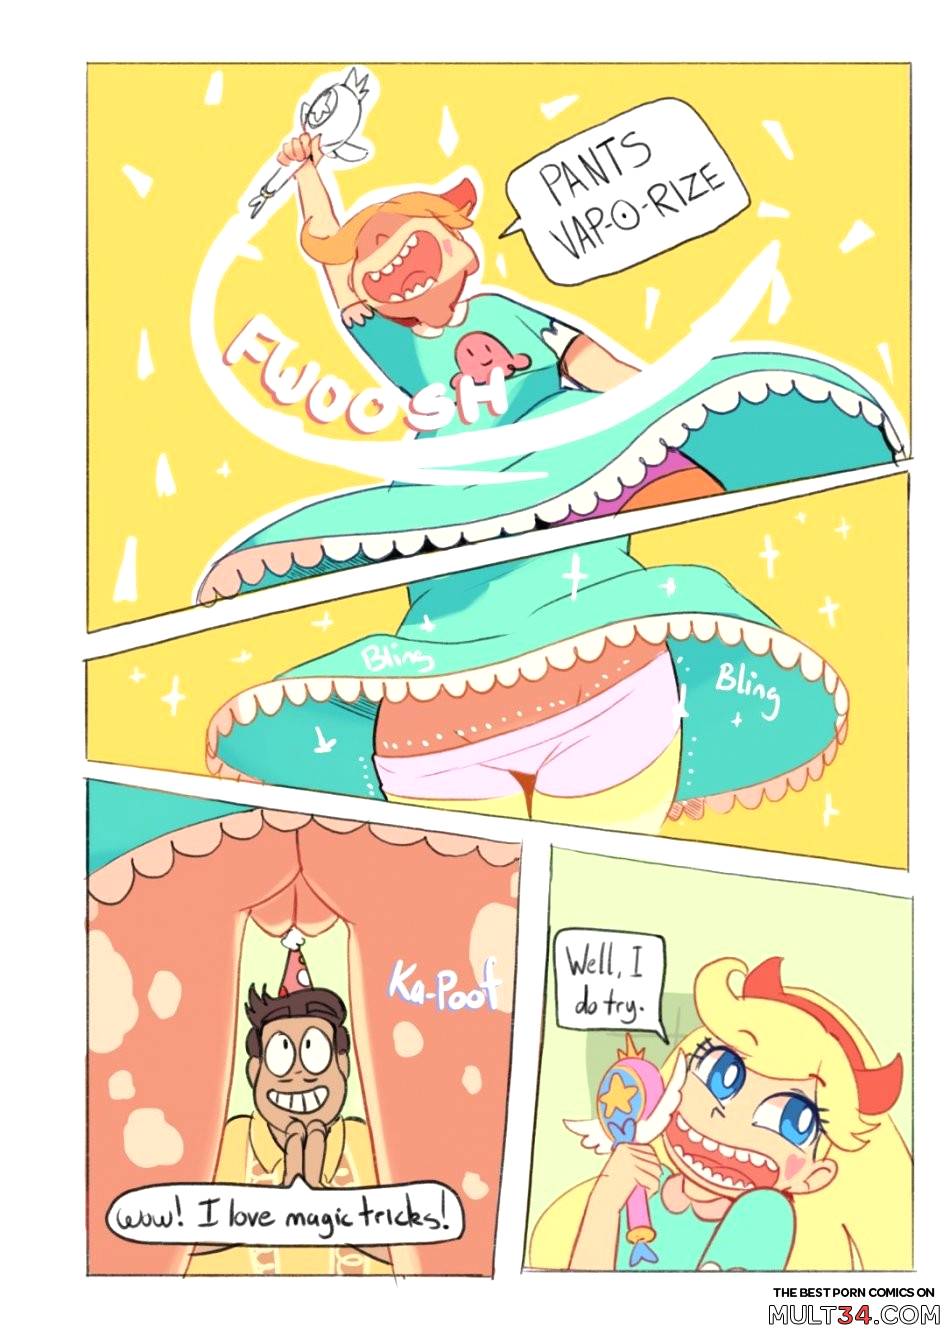 Star's 50th Day Anniversary page 3